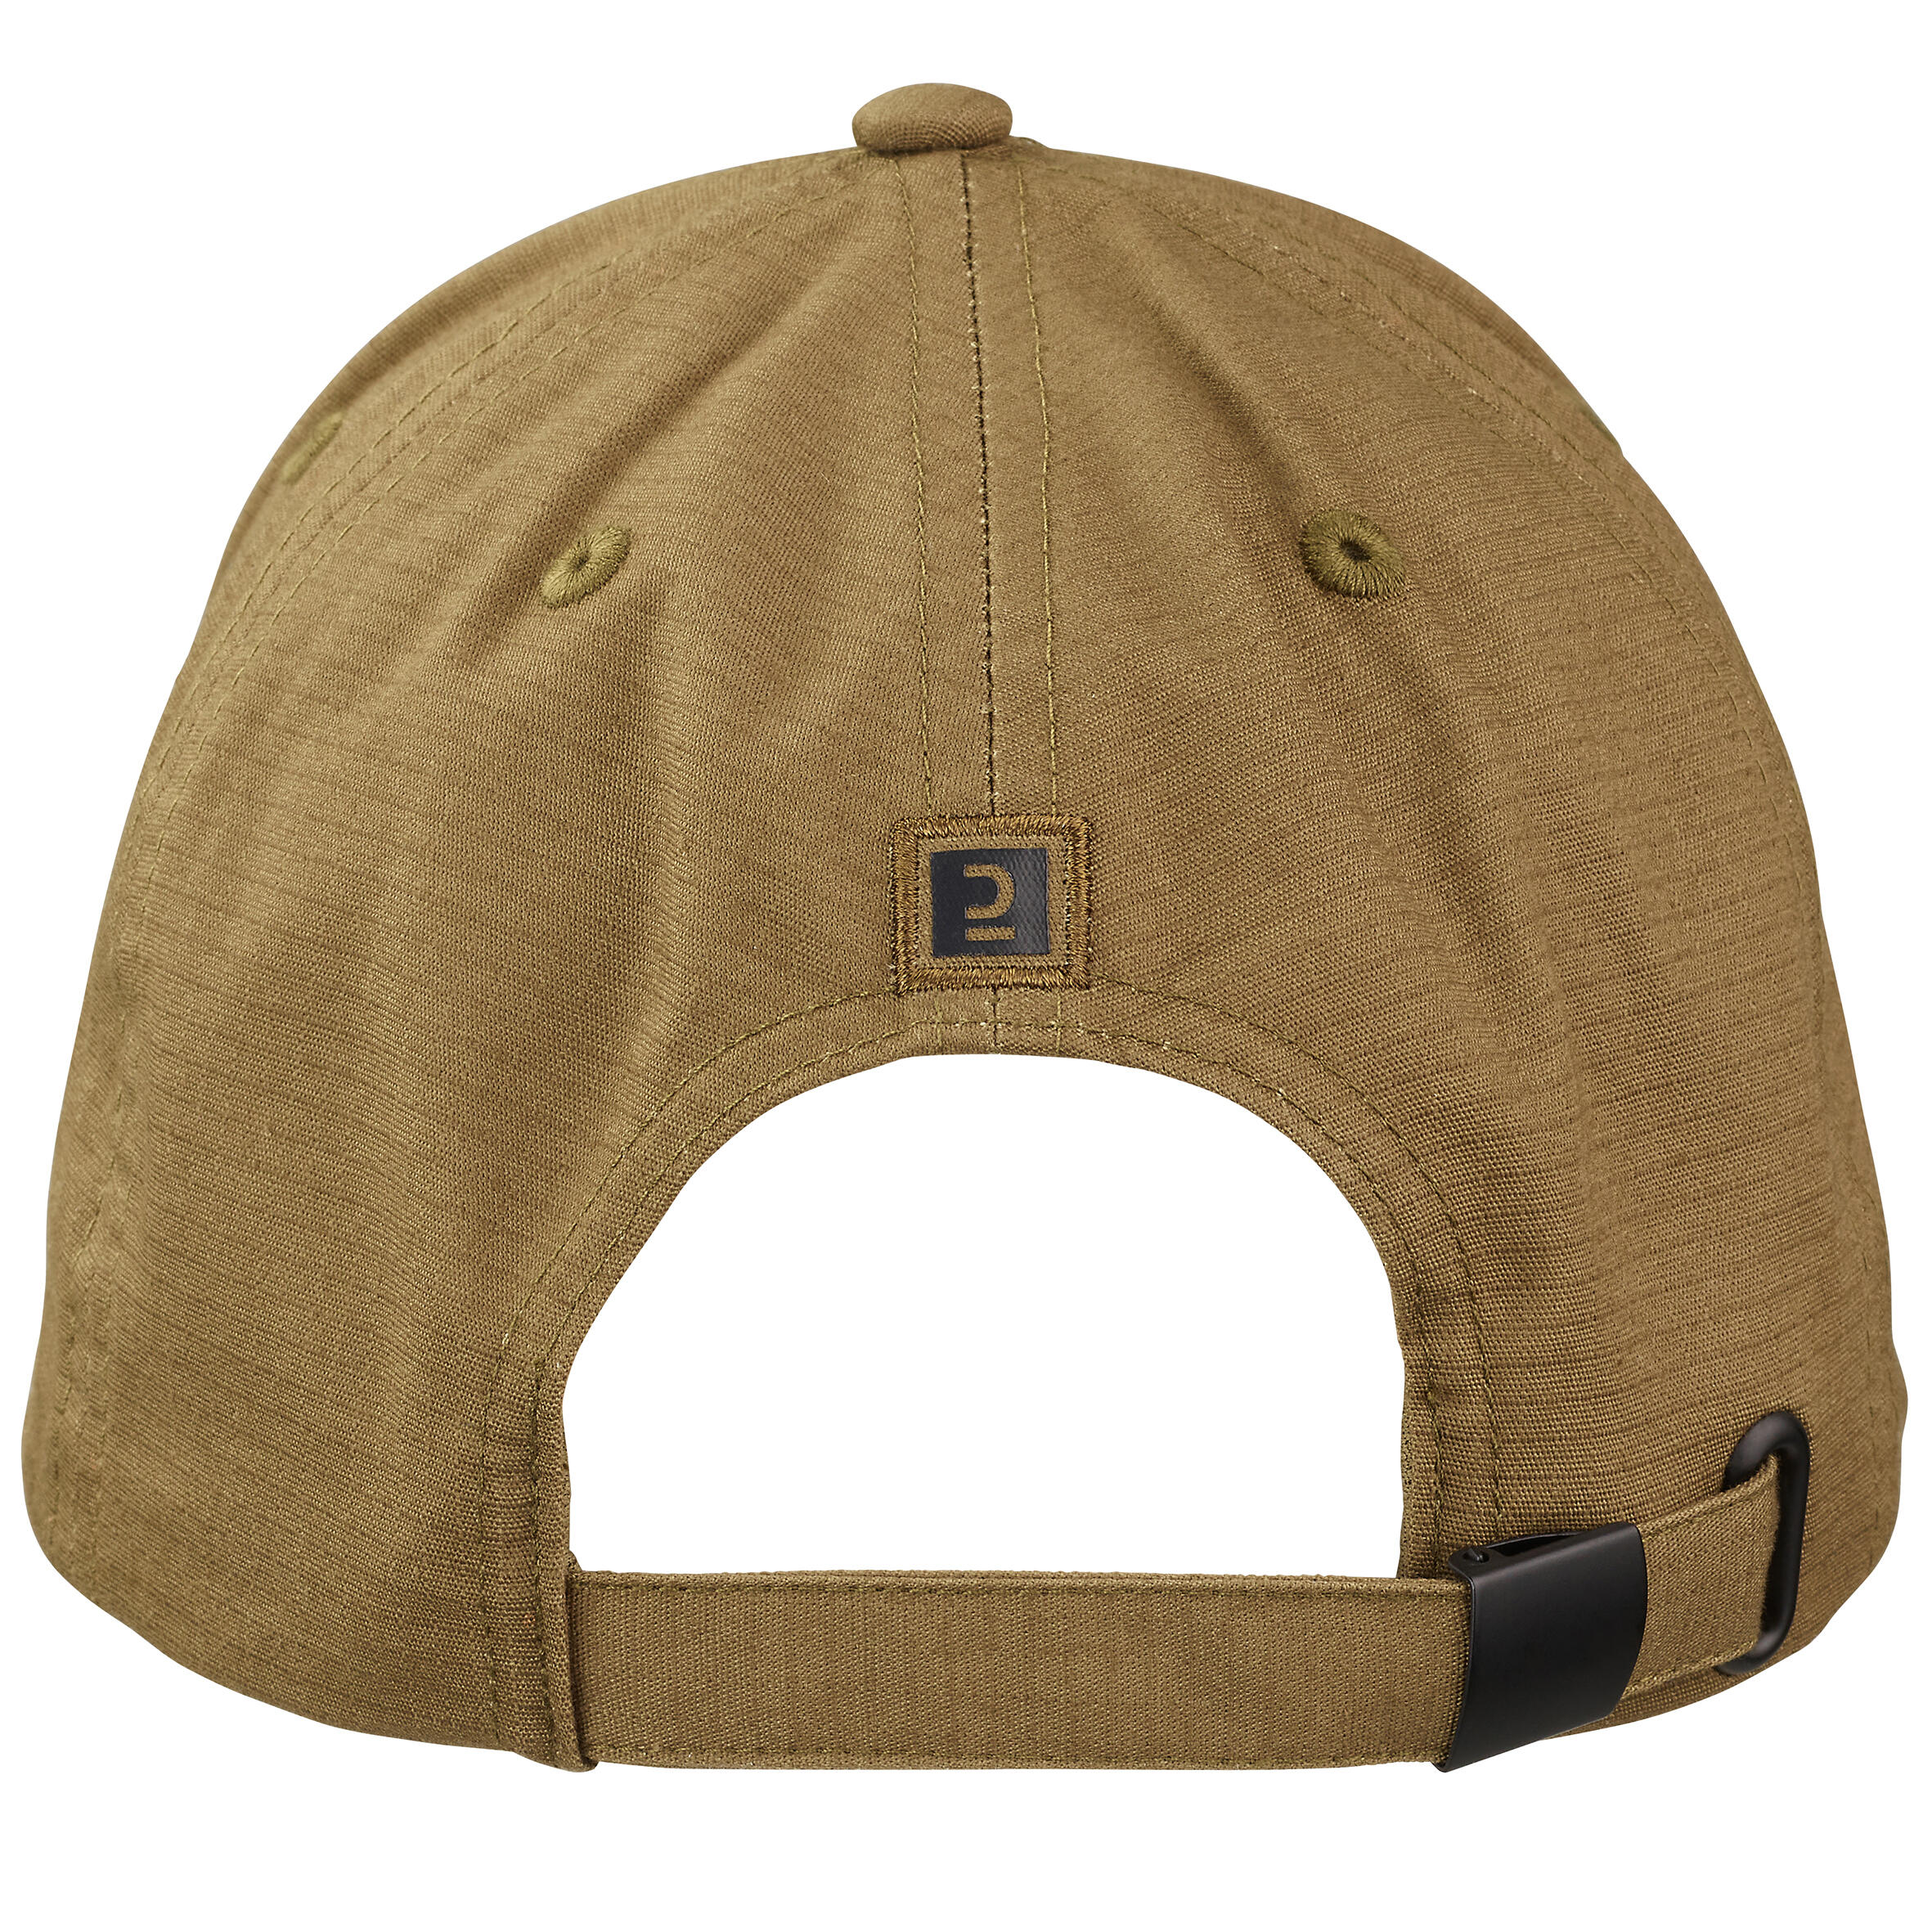 Durable Country Sport Cap 500 - Olive Green 4/10